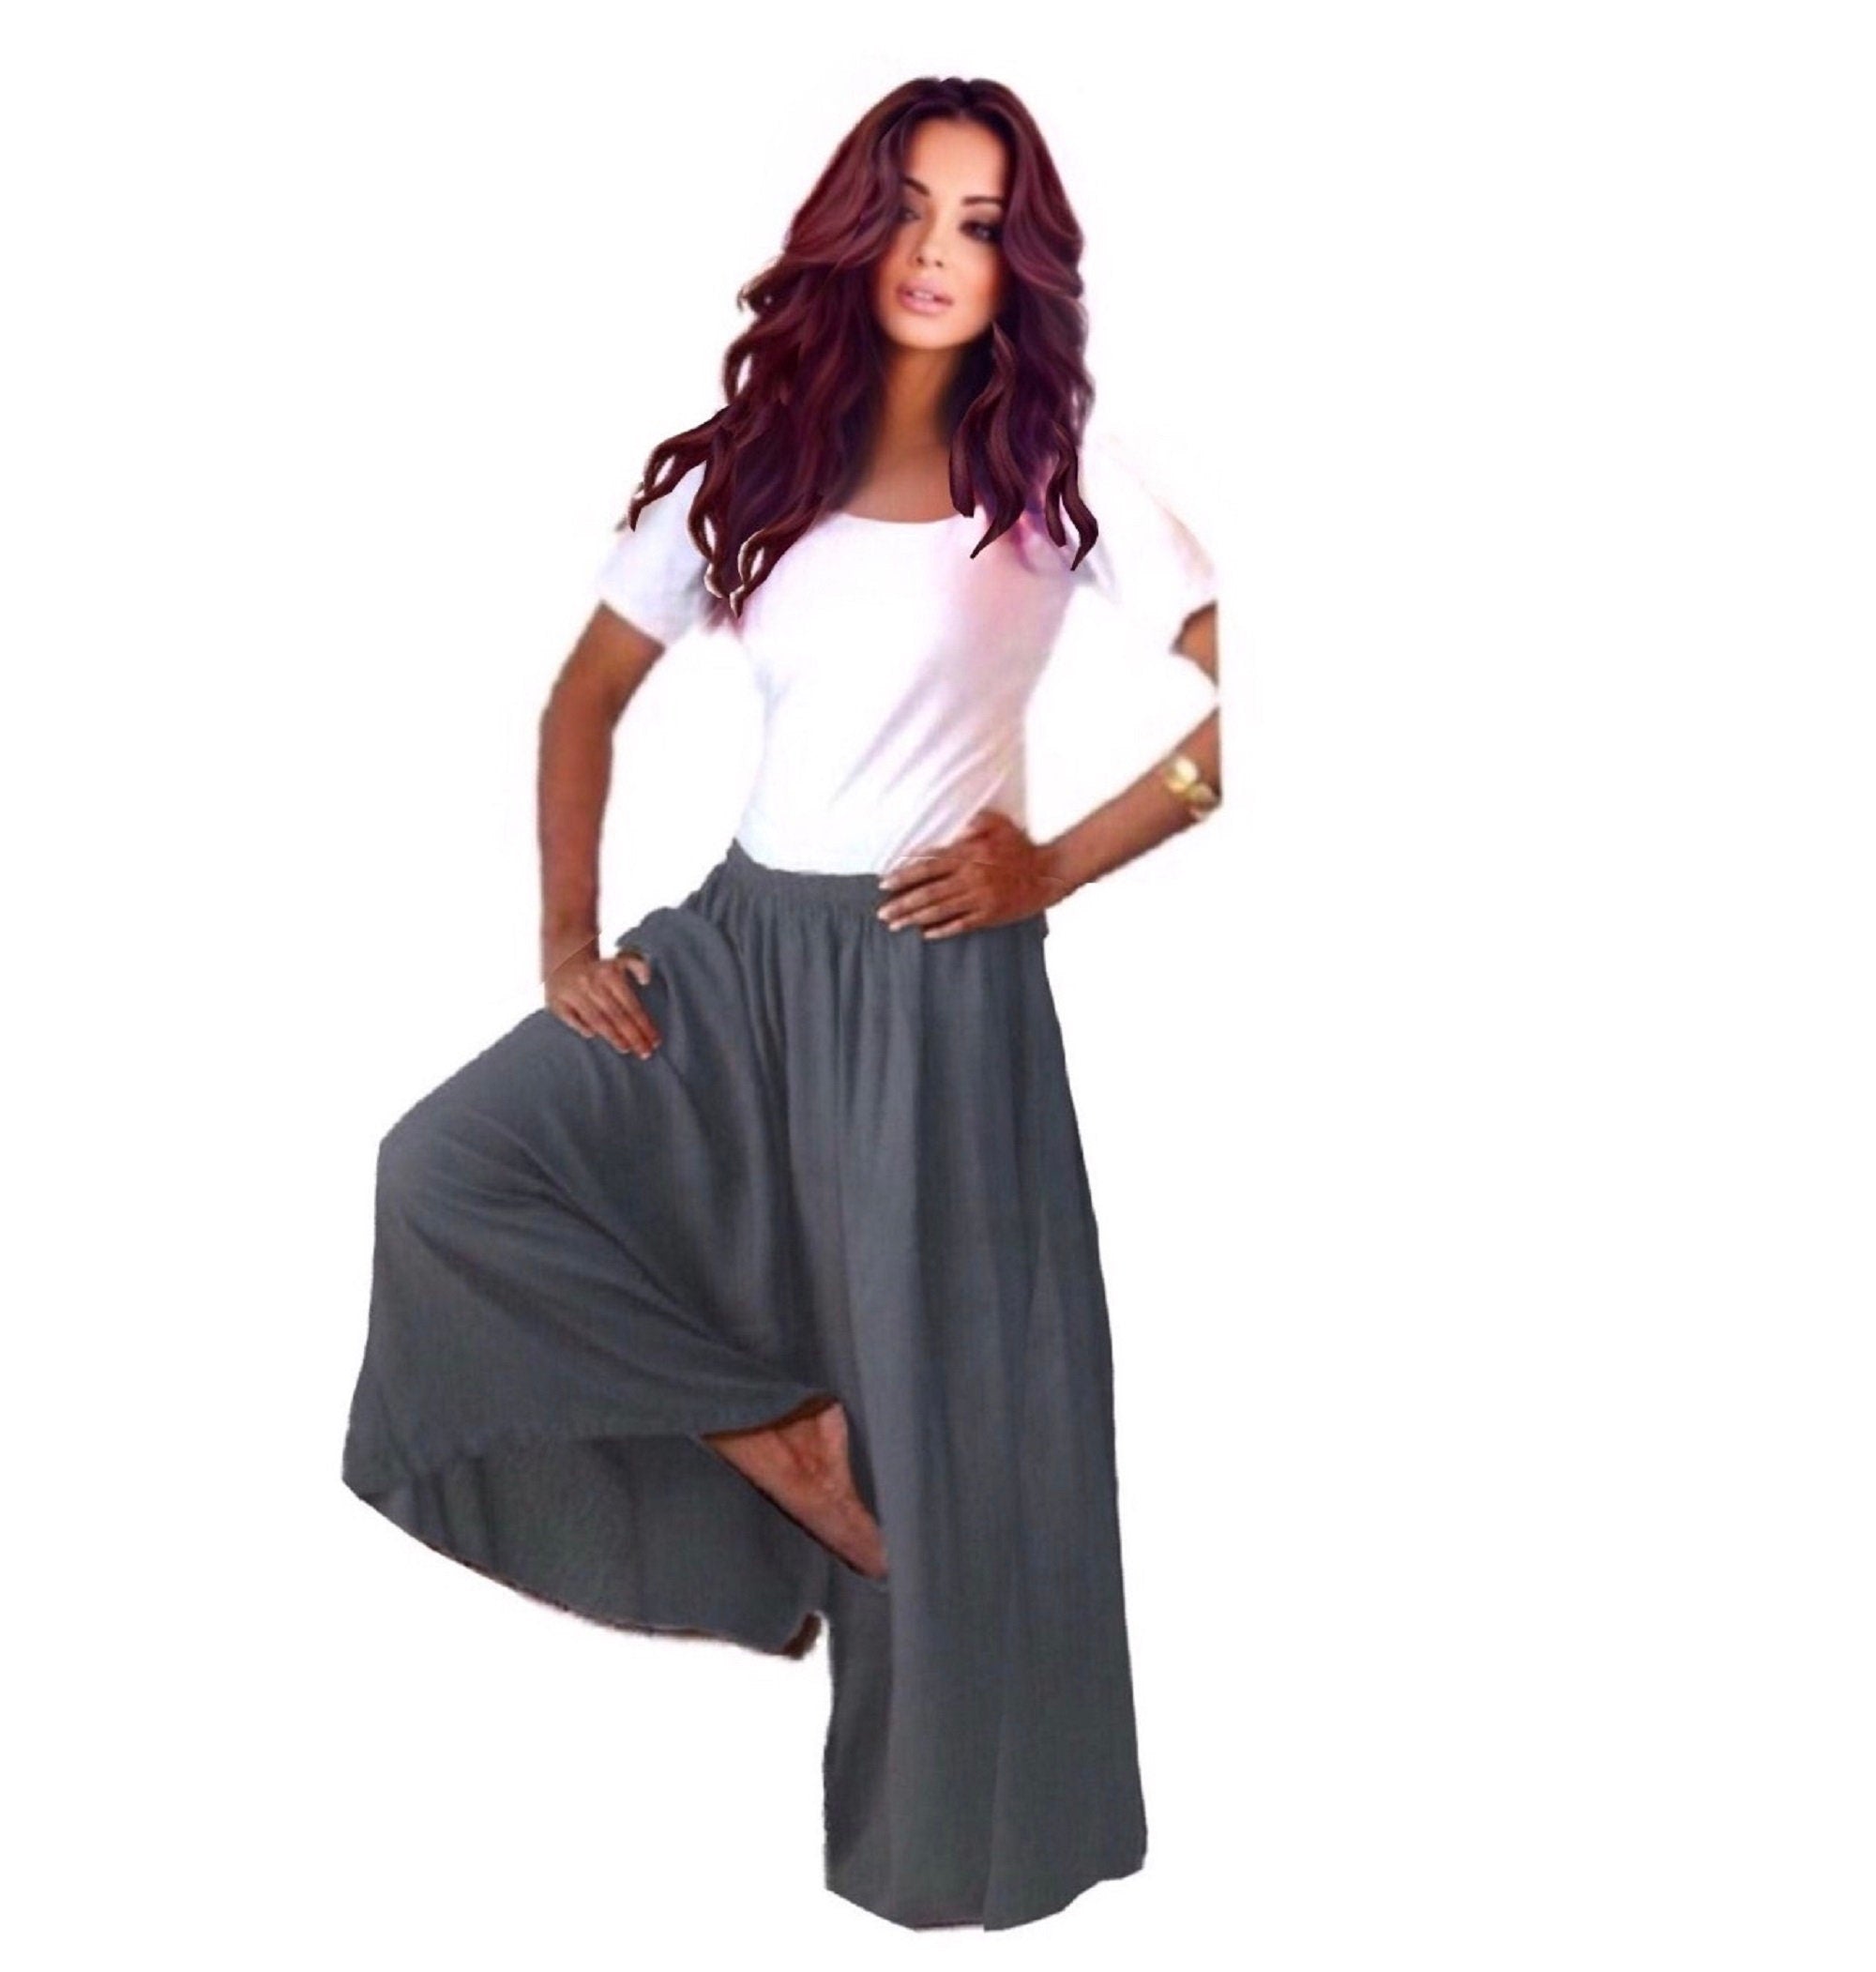 Yoga and Dance Clothing, Palazzo Capri Flow Pants, Wide Leg Gaucho Trousers,  Pixie Festival Clothes, Skirtbelt, Pointy, Boho 3/4 Length Crop 